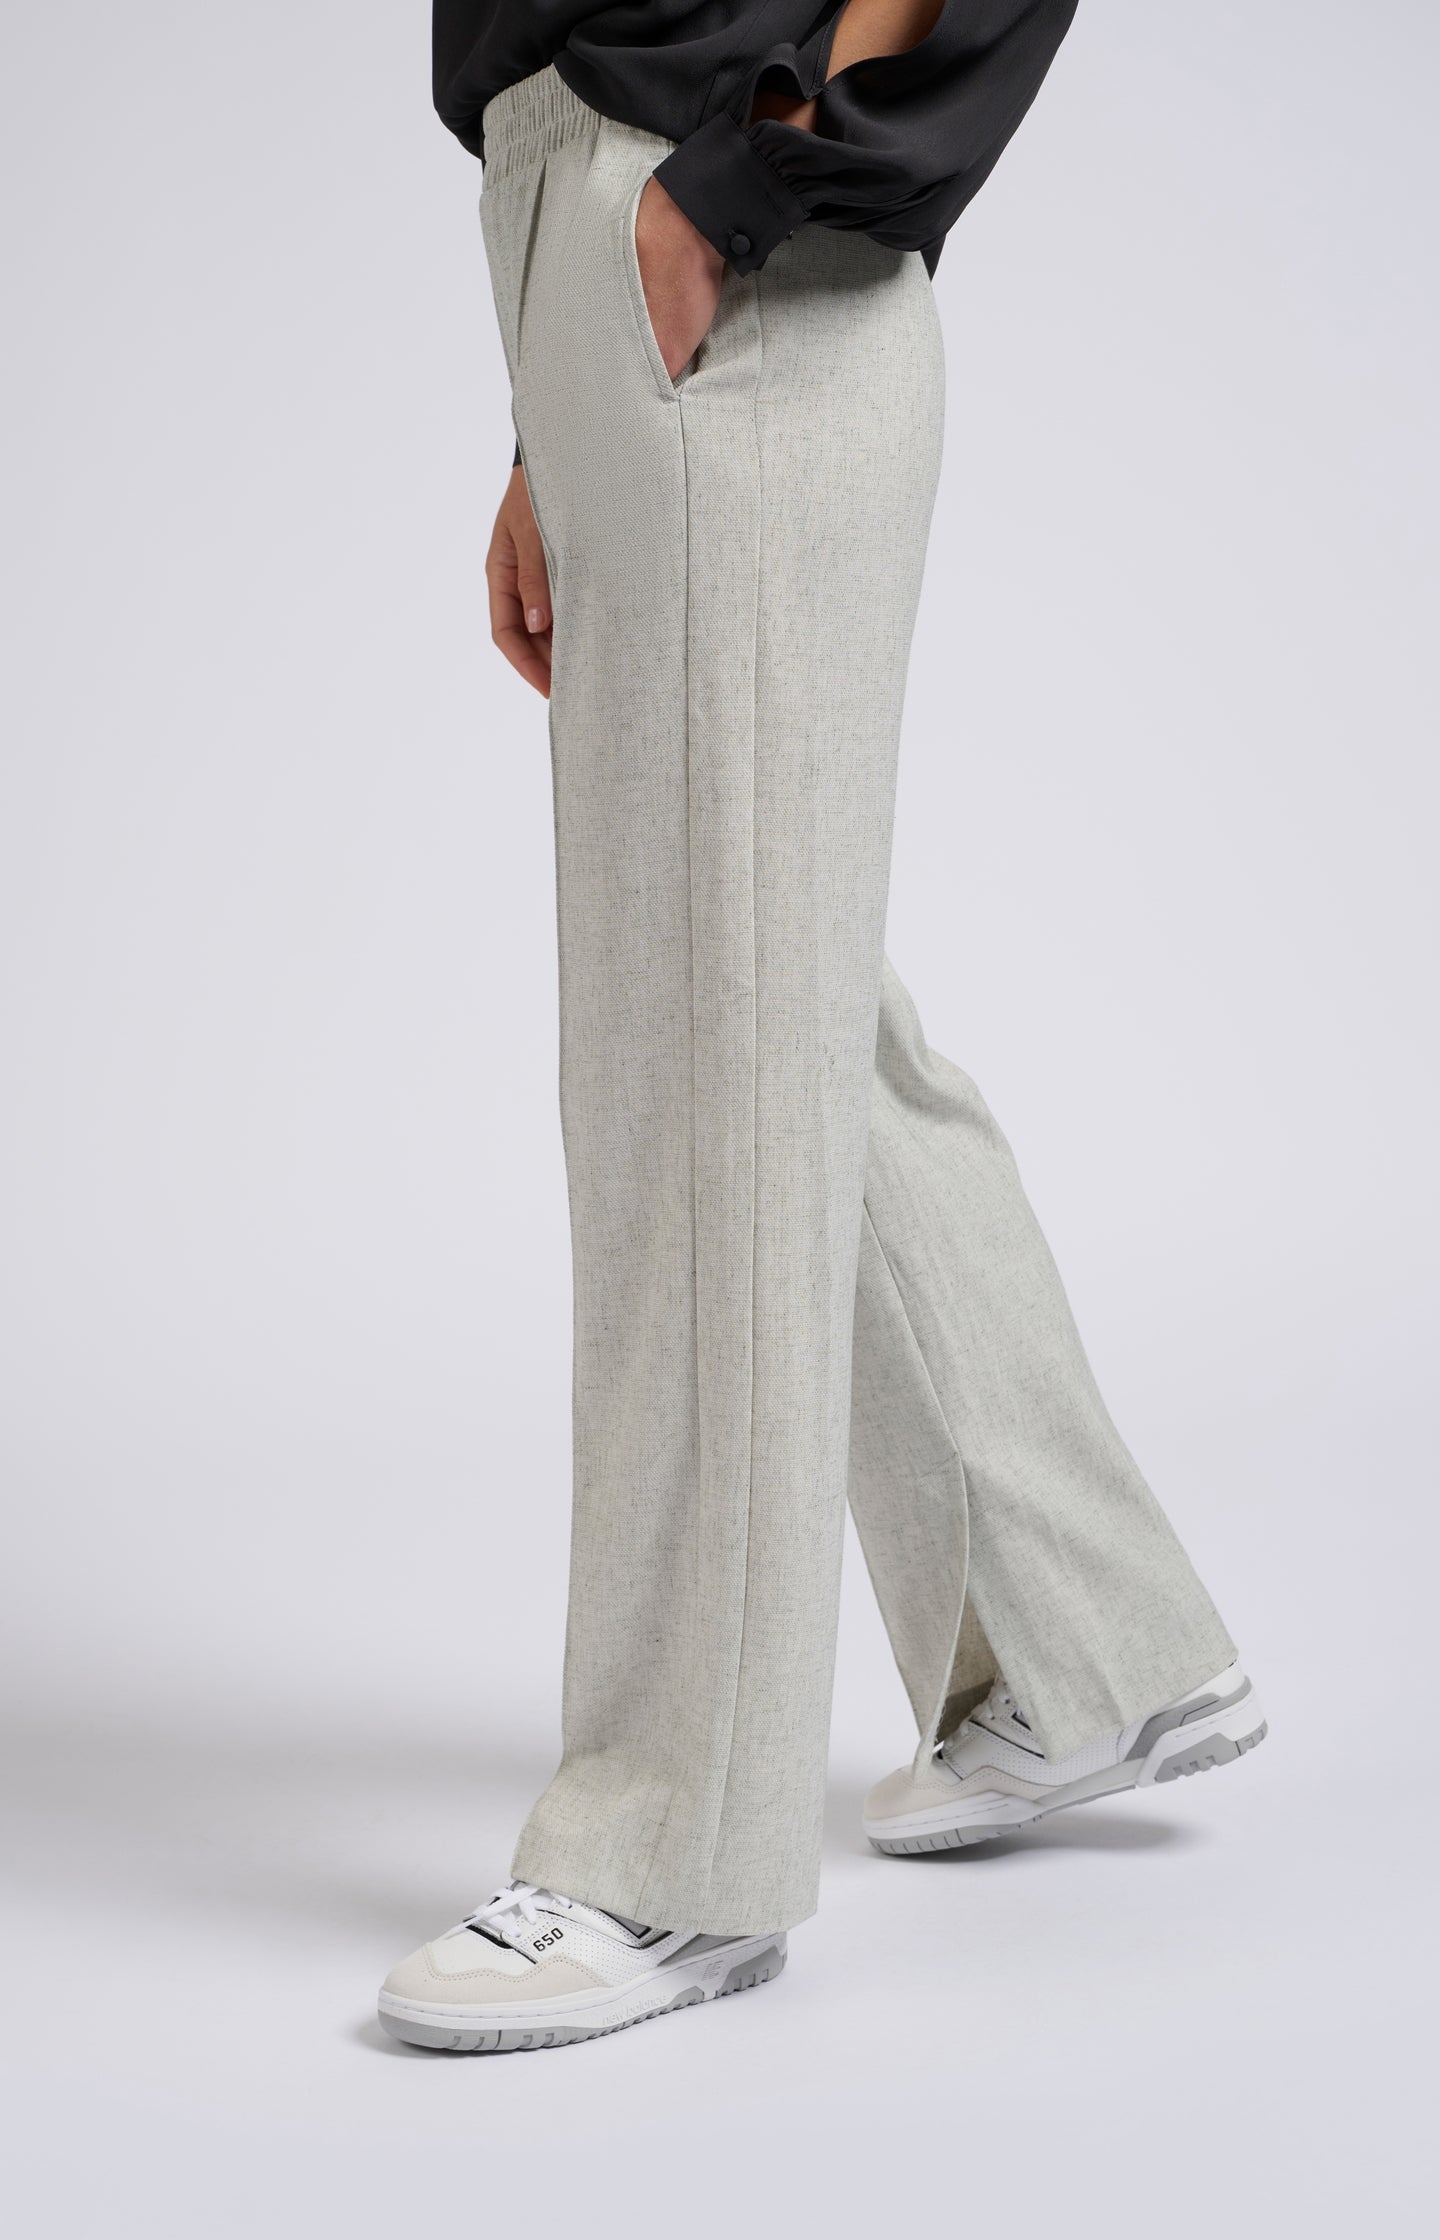 Woven melange trousers with wide legs